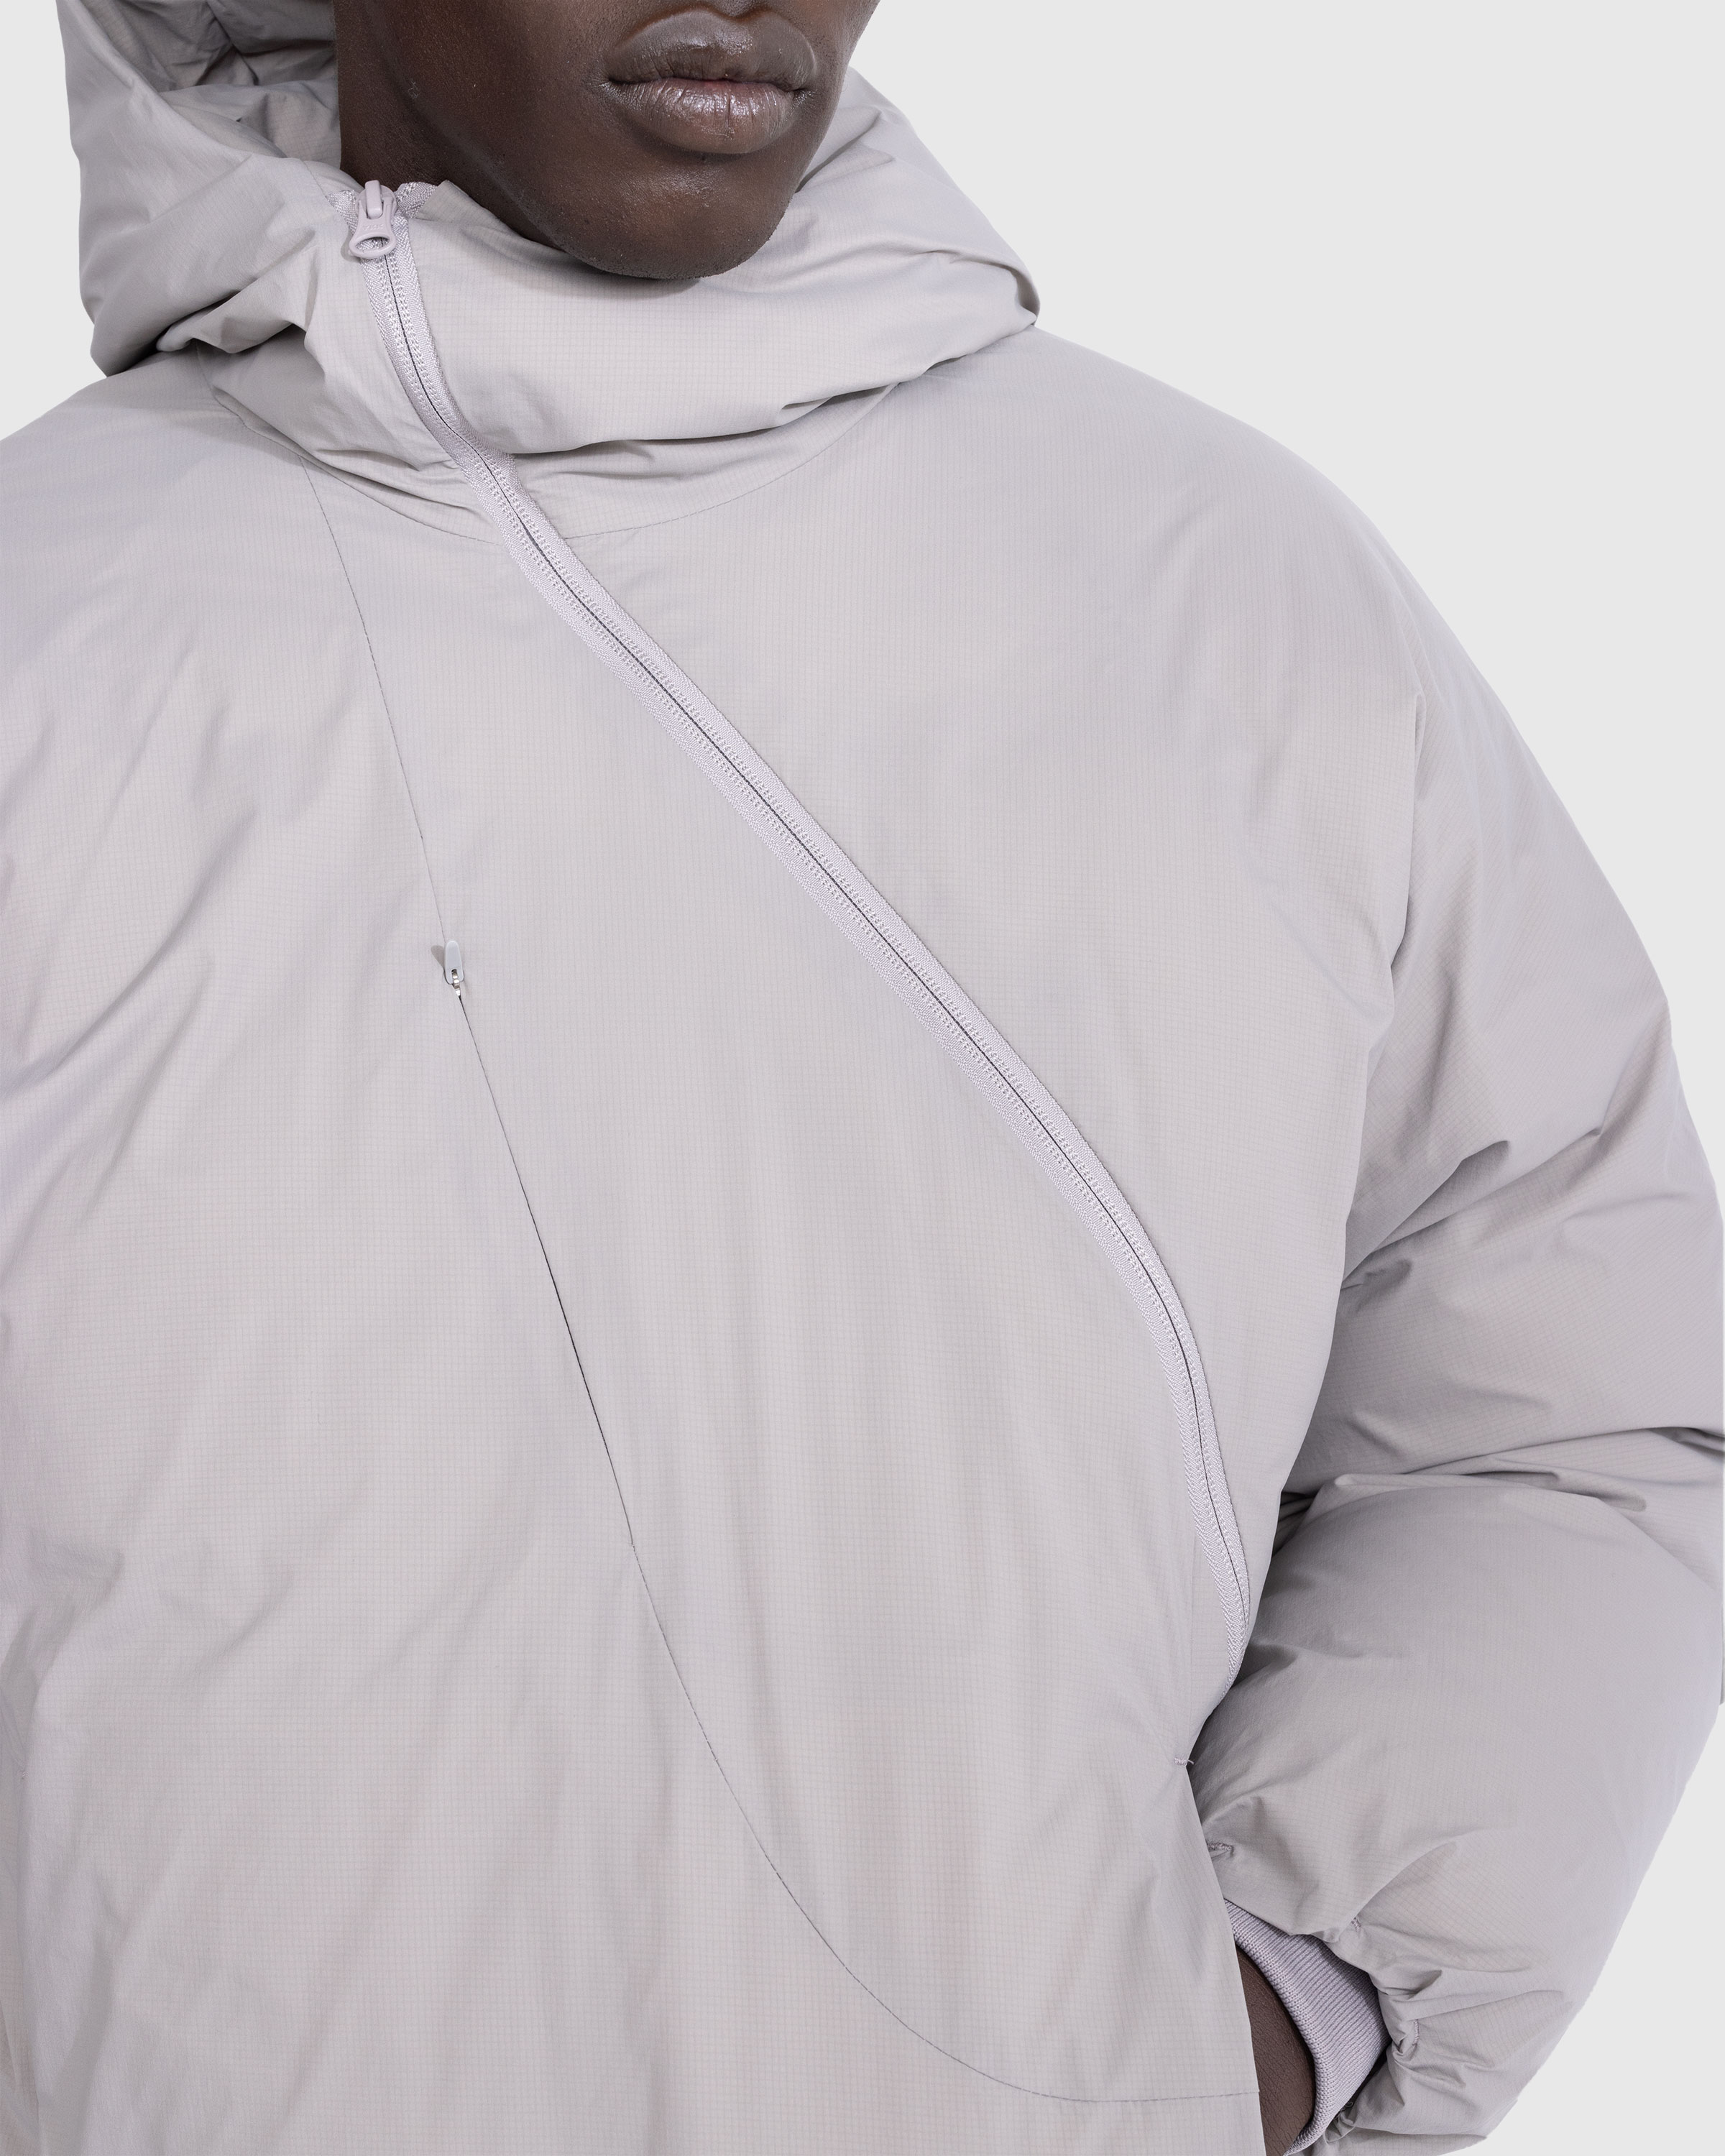 Post Archive Faction (PAF) - 5.1 DOWN CENTER JACKET - Clothing - Grey - Image 5